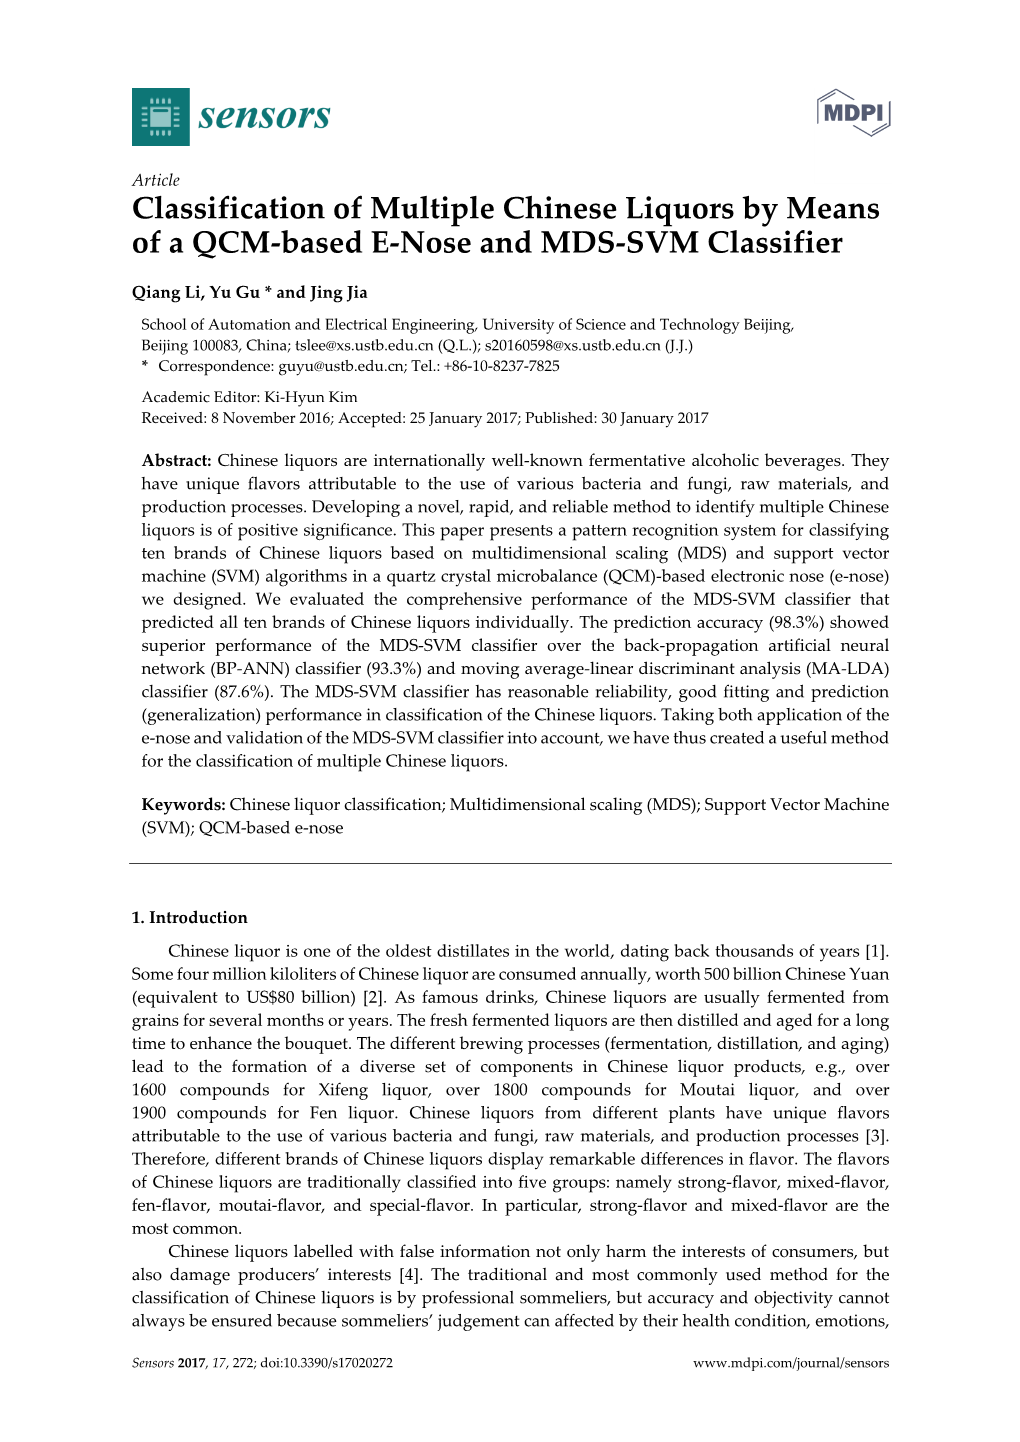 Classification of Multiple Chinese Liquors by Means of a QCM-Based E-Nose and MDS-SVM Classifier